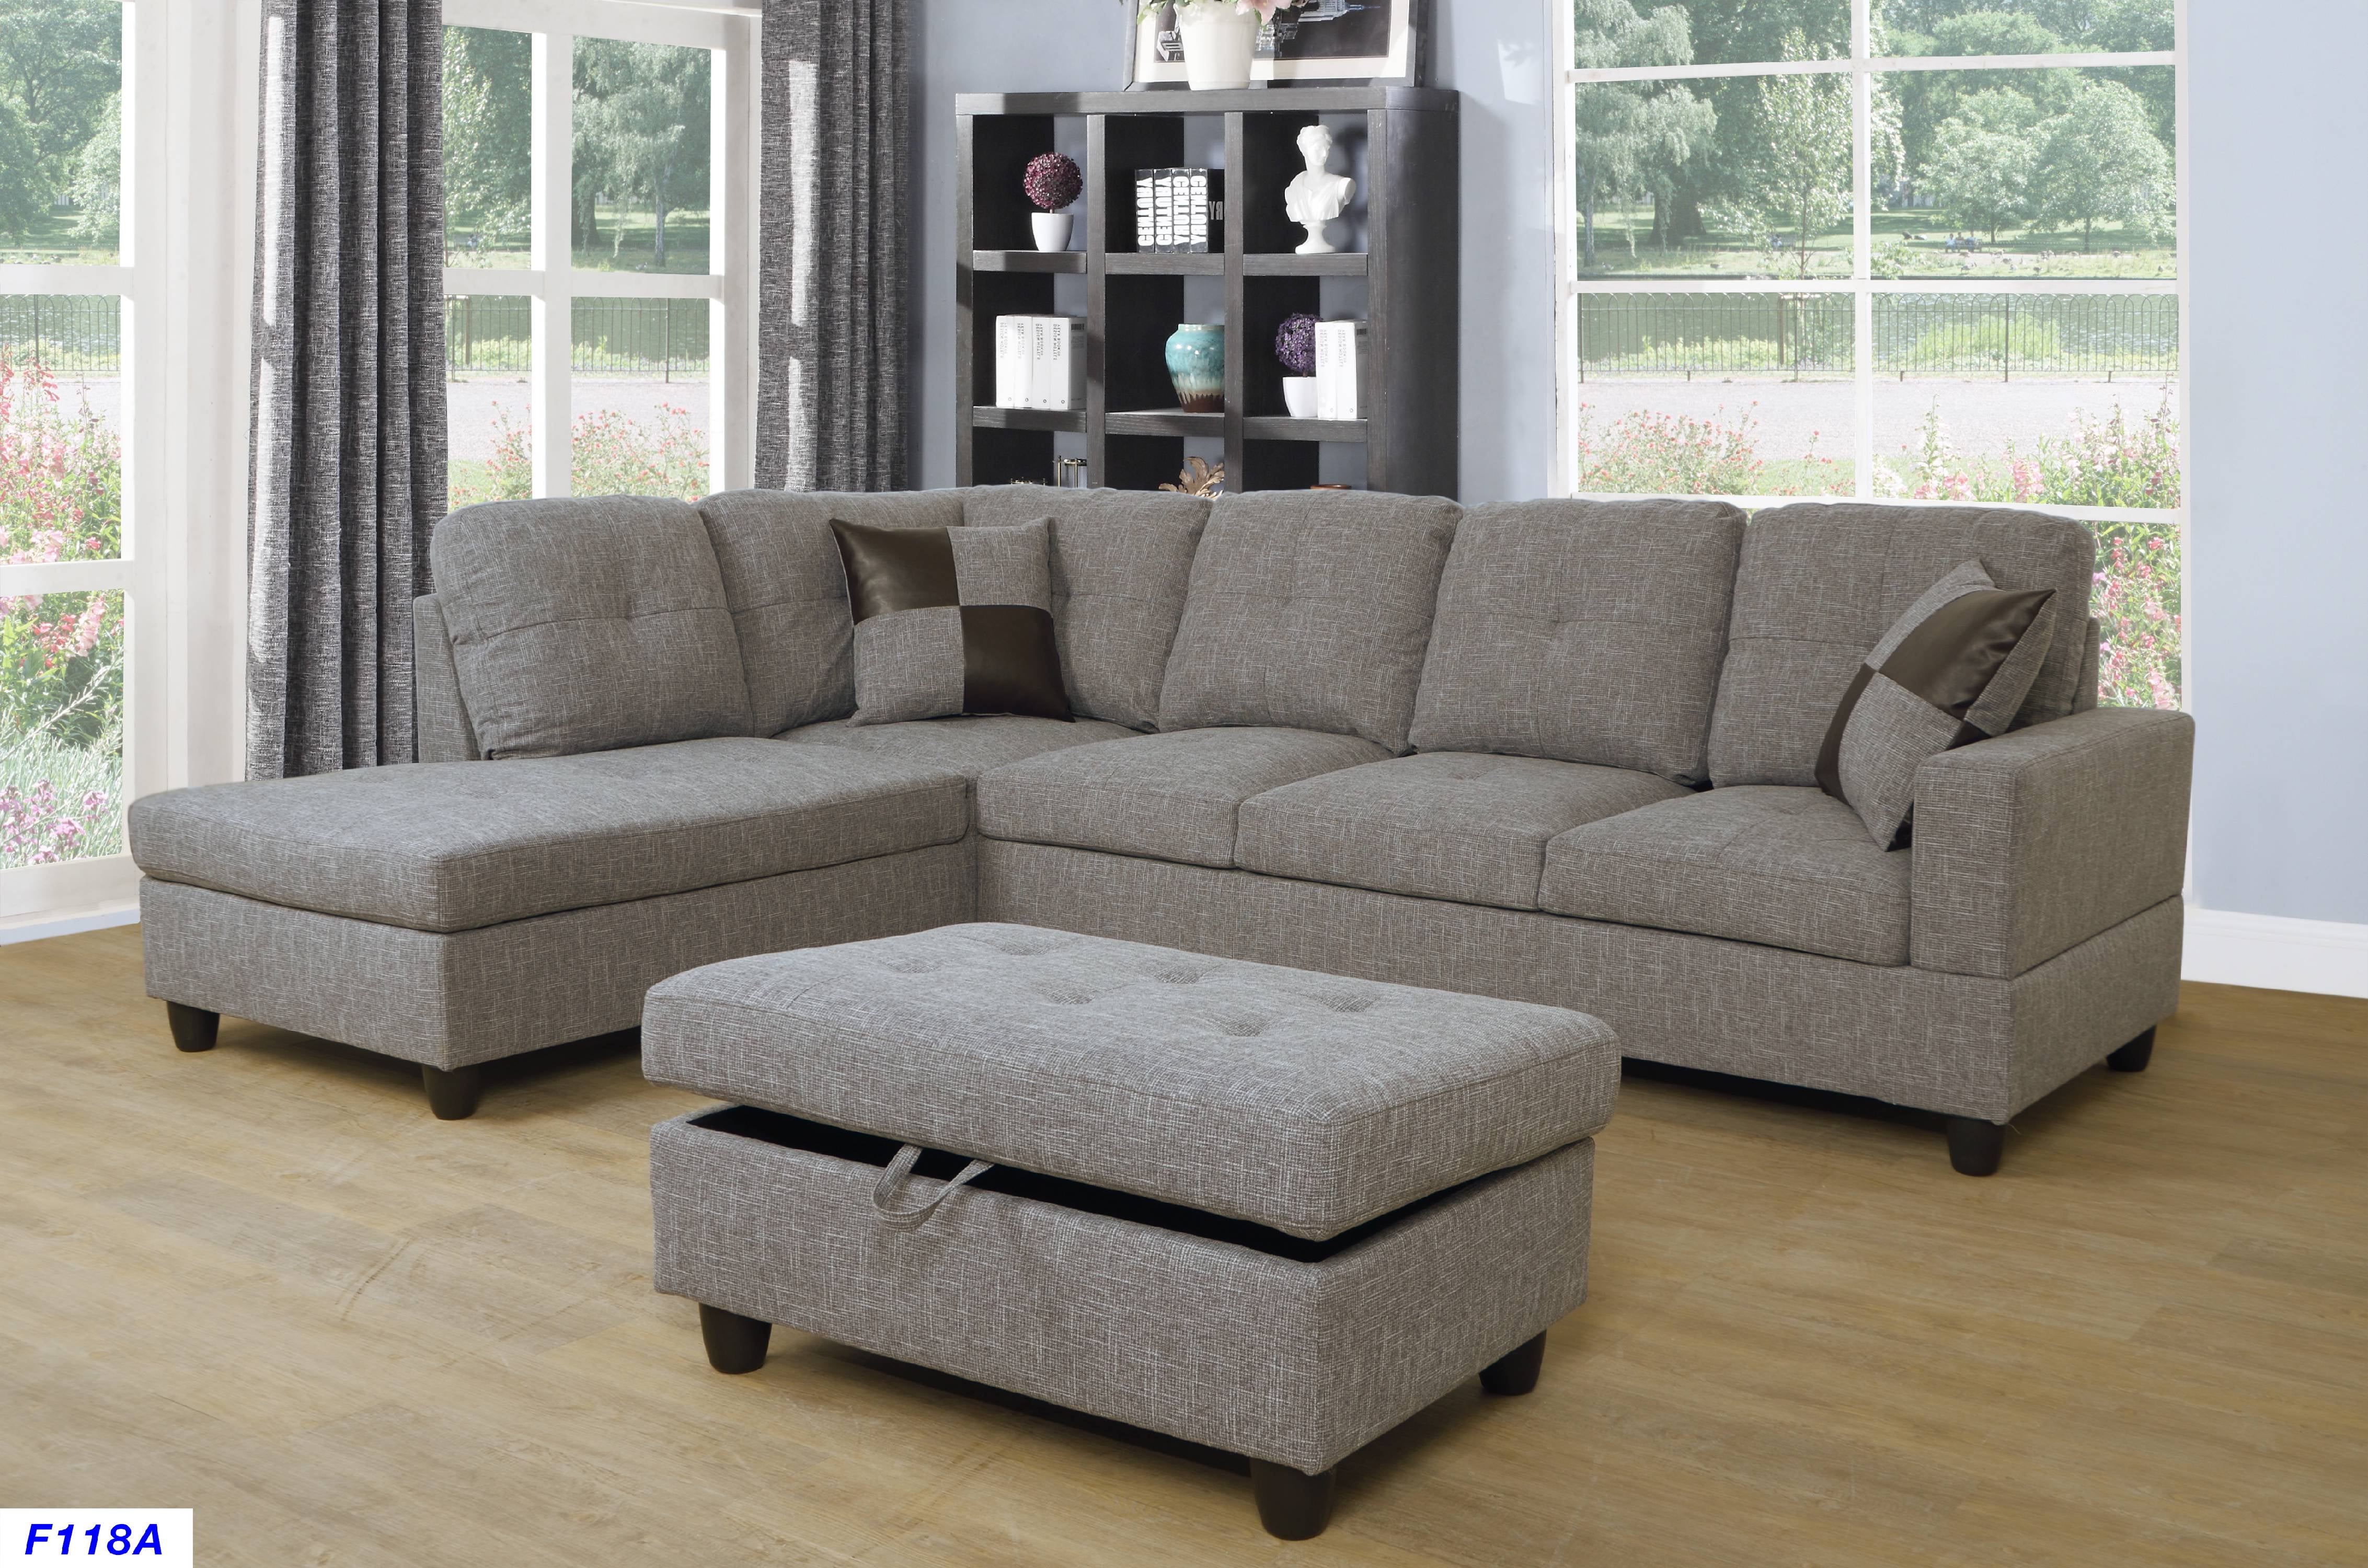 PonLiving Furniture_L Shape Sectional Sofa Set with Storage Ottoman